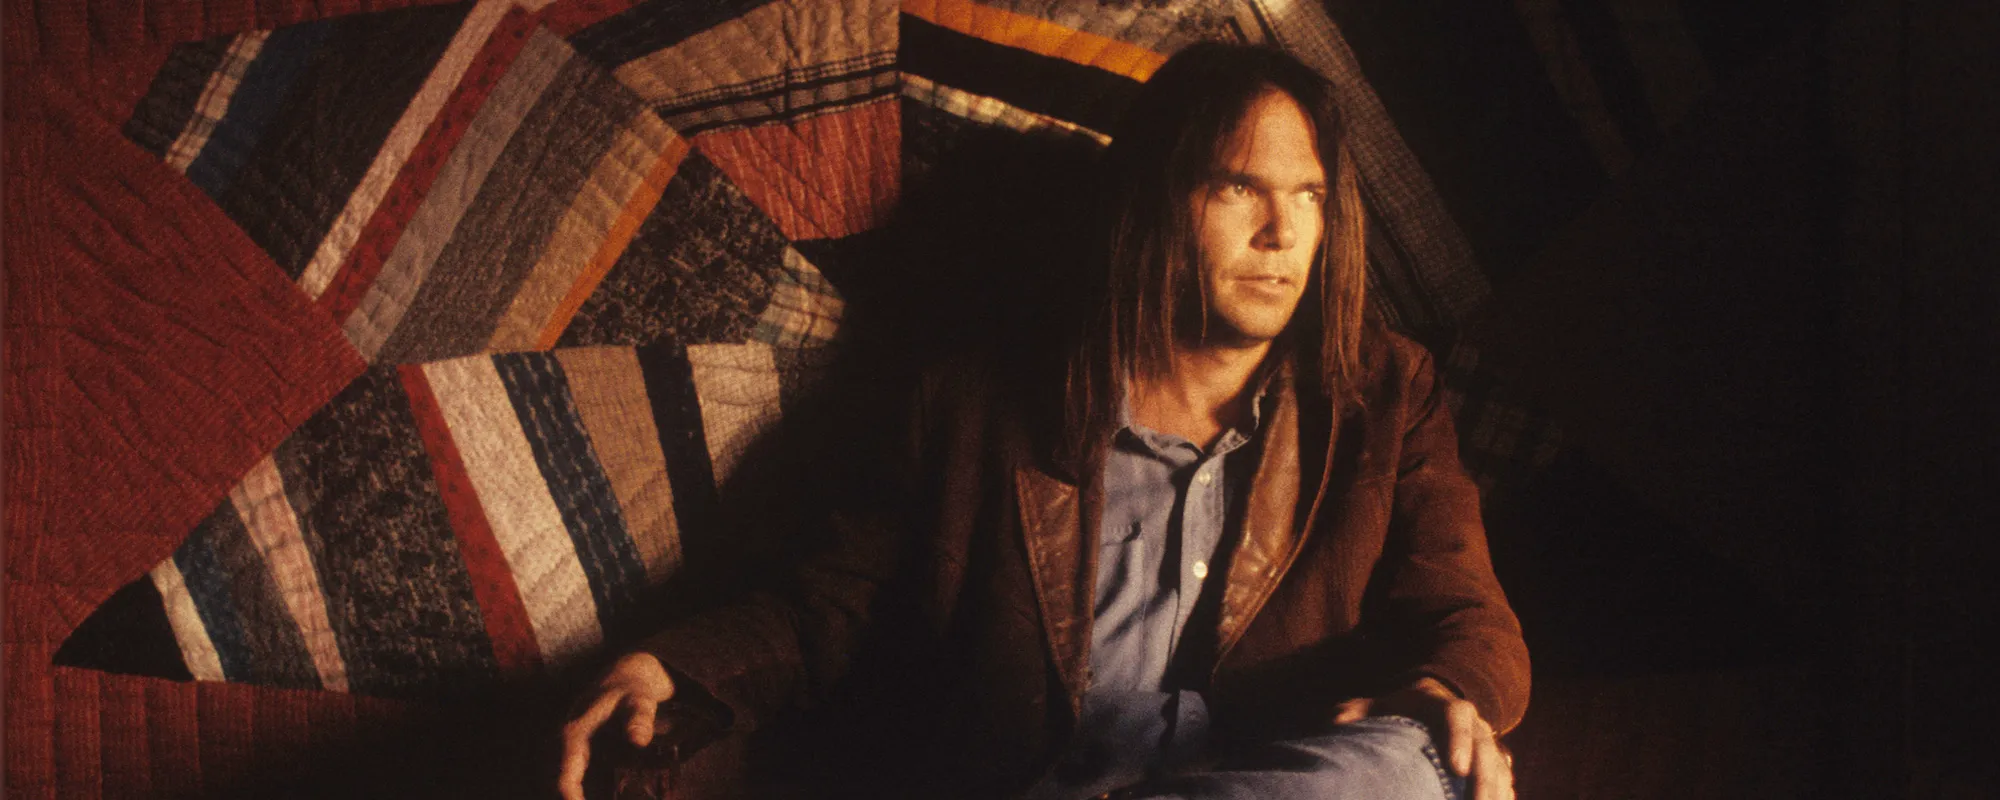 Neil Young Releasing ‘Zuma’ Era Collection ‘Dume’ as Standalone Two-LP Set